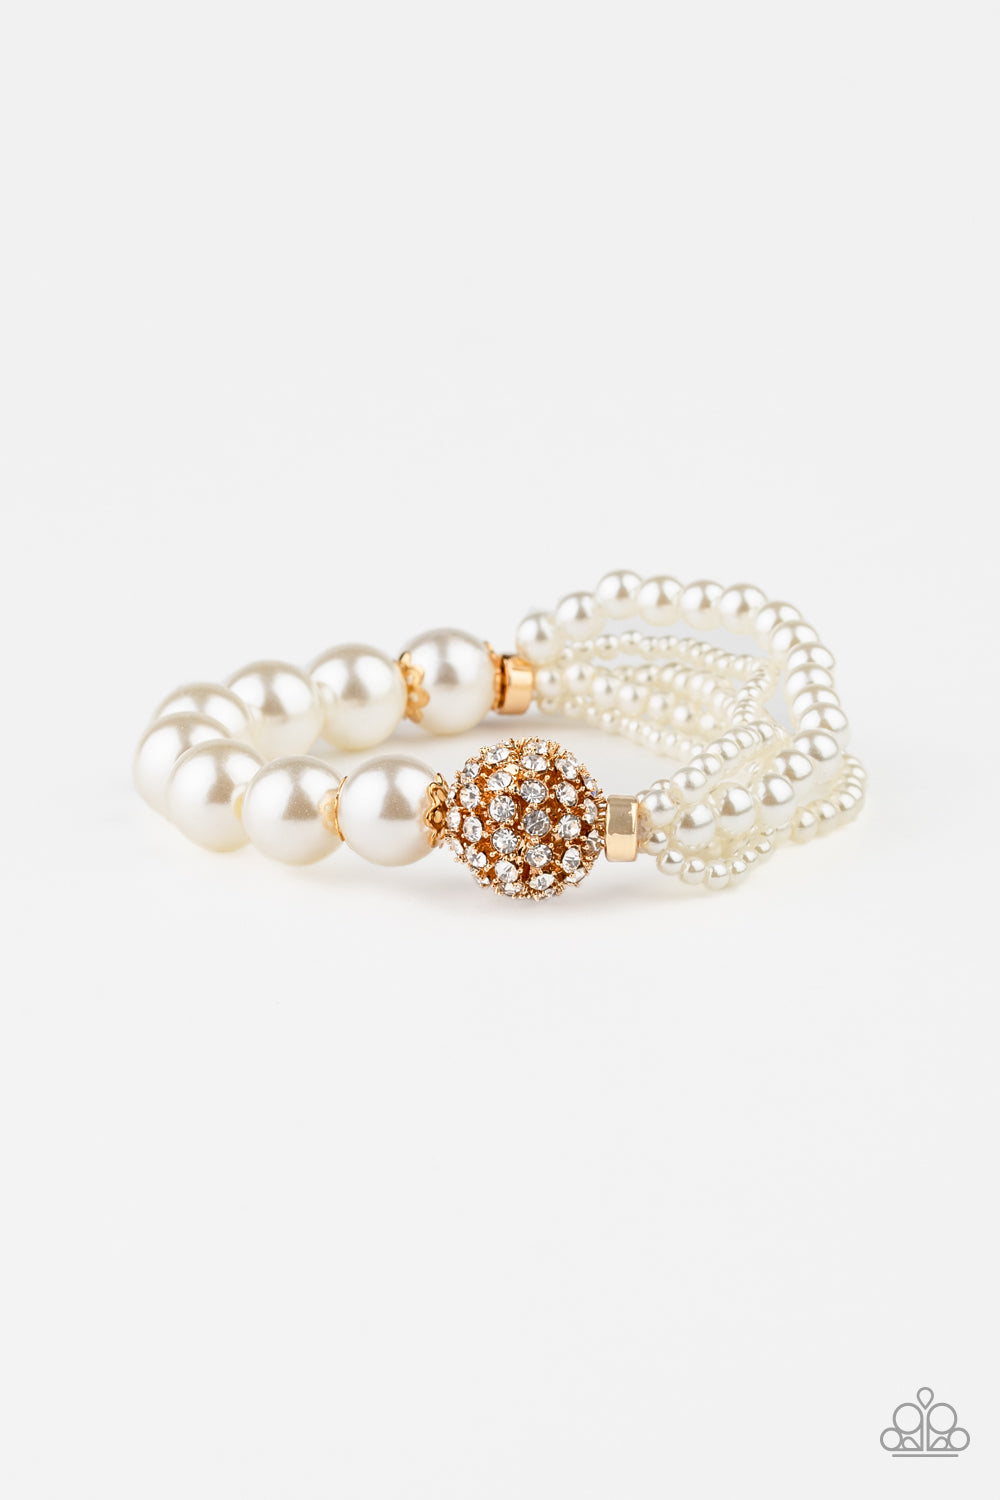 VINTAGE COLLISION - GOLD AND WHITE PEARLS STRETCH BRACELET